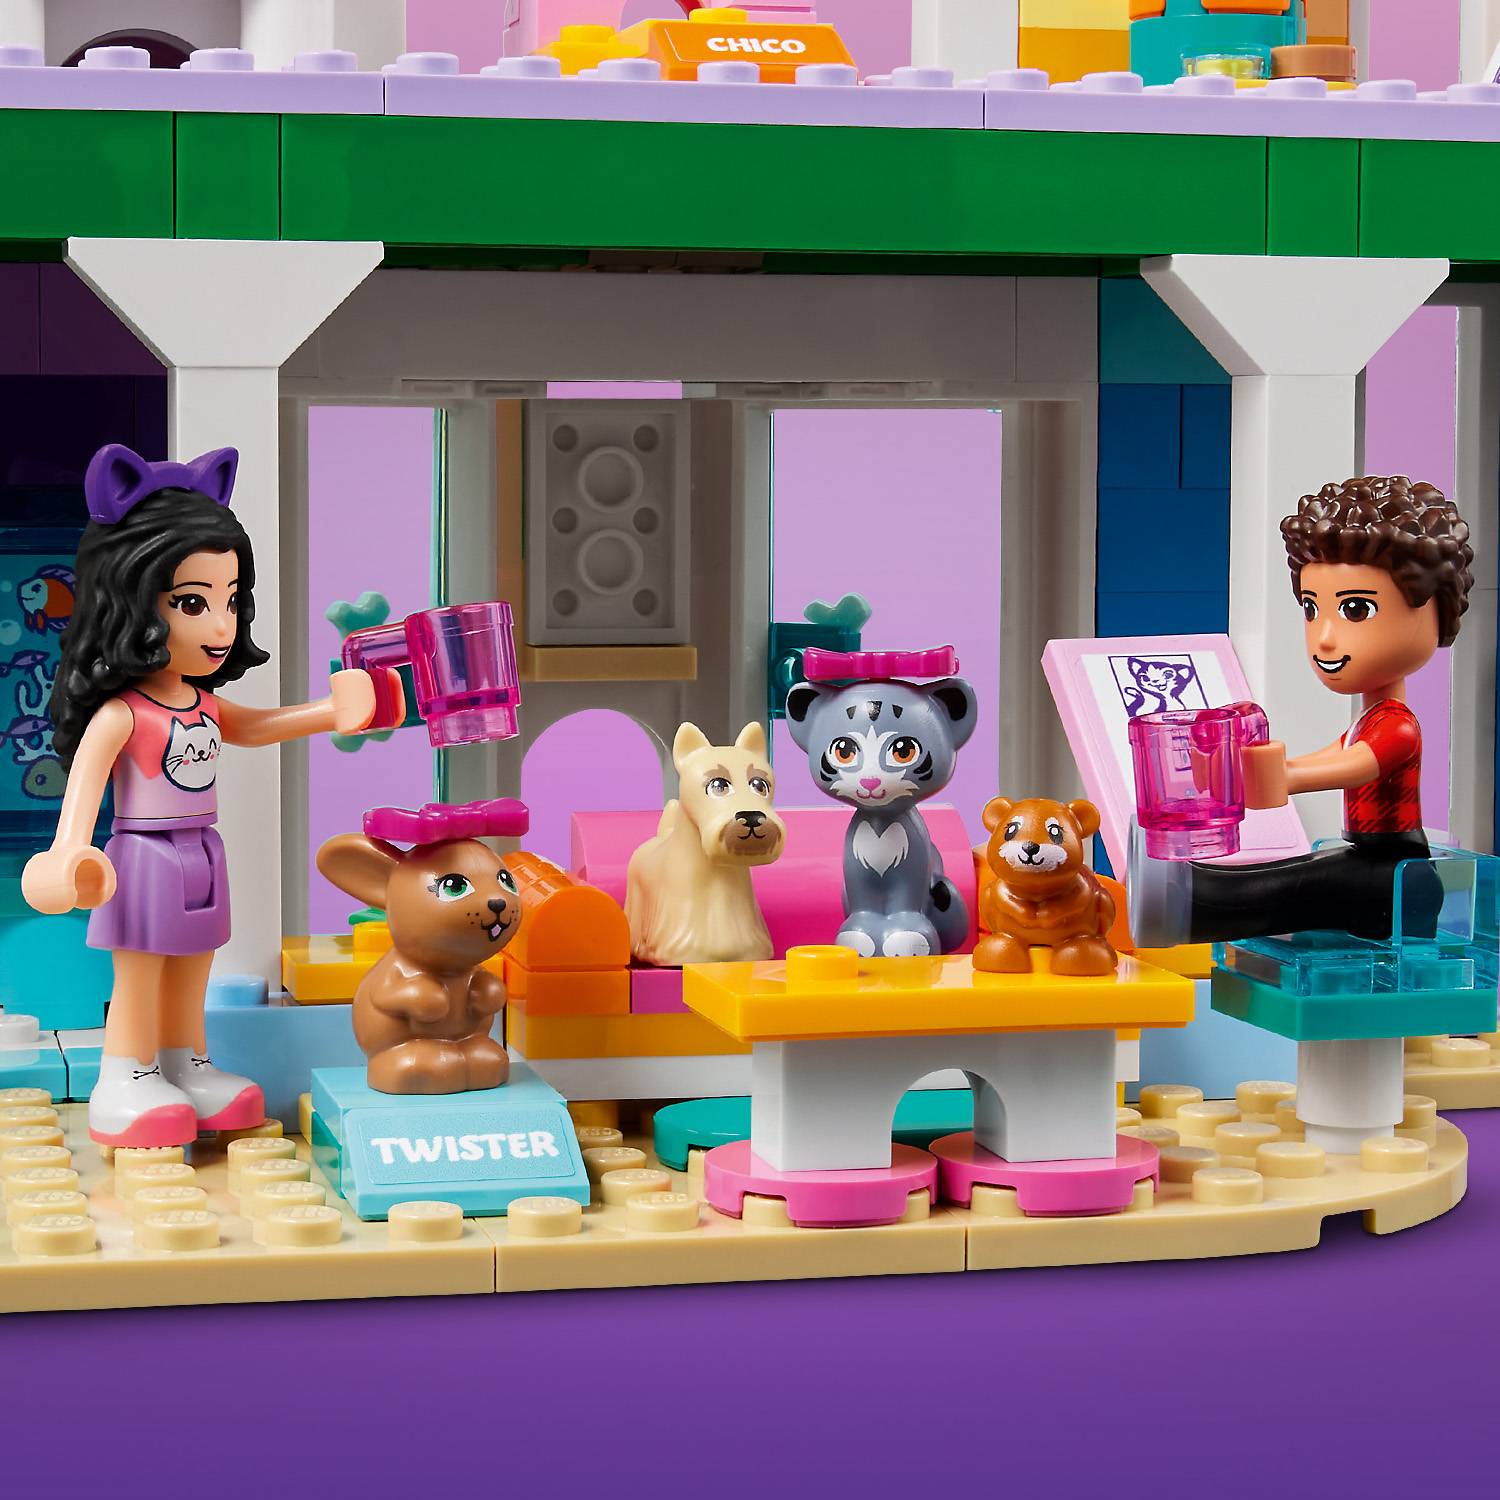 LEGO Friends Pet Day-Care Center 41718 Animal Set, Heartlake City Toy,  Birthday Gifts for Kids, Girls and Boys 7 Plus Years Old, with Doggy Figure  & 3